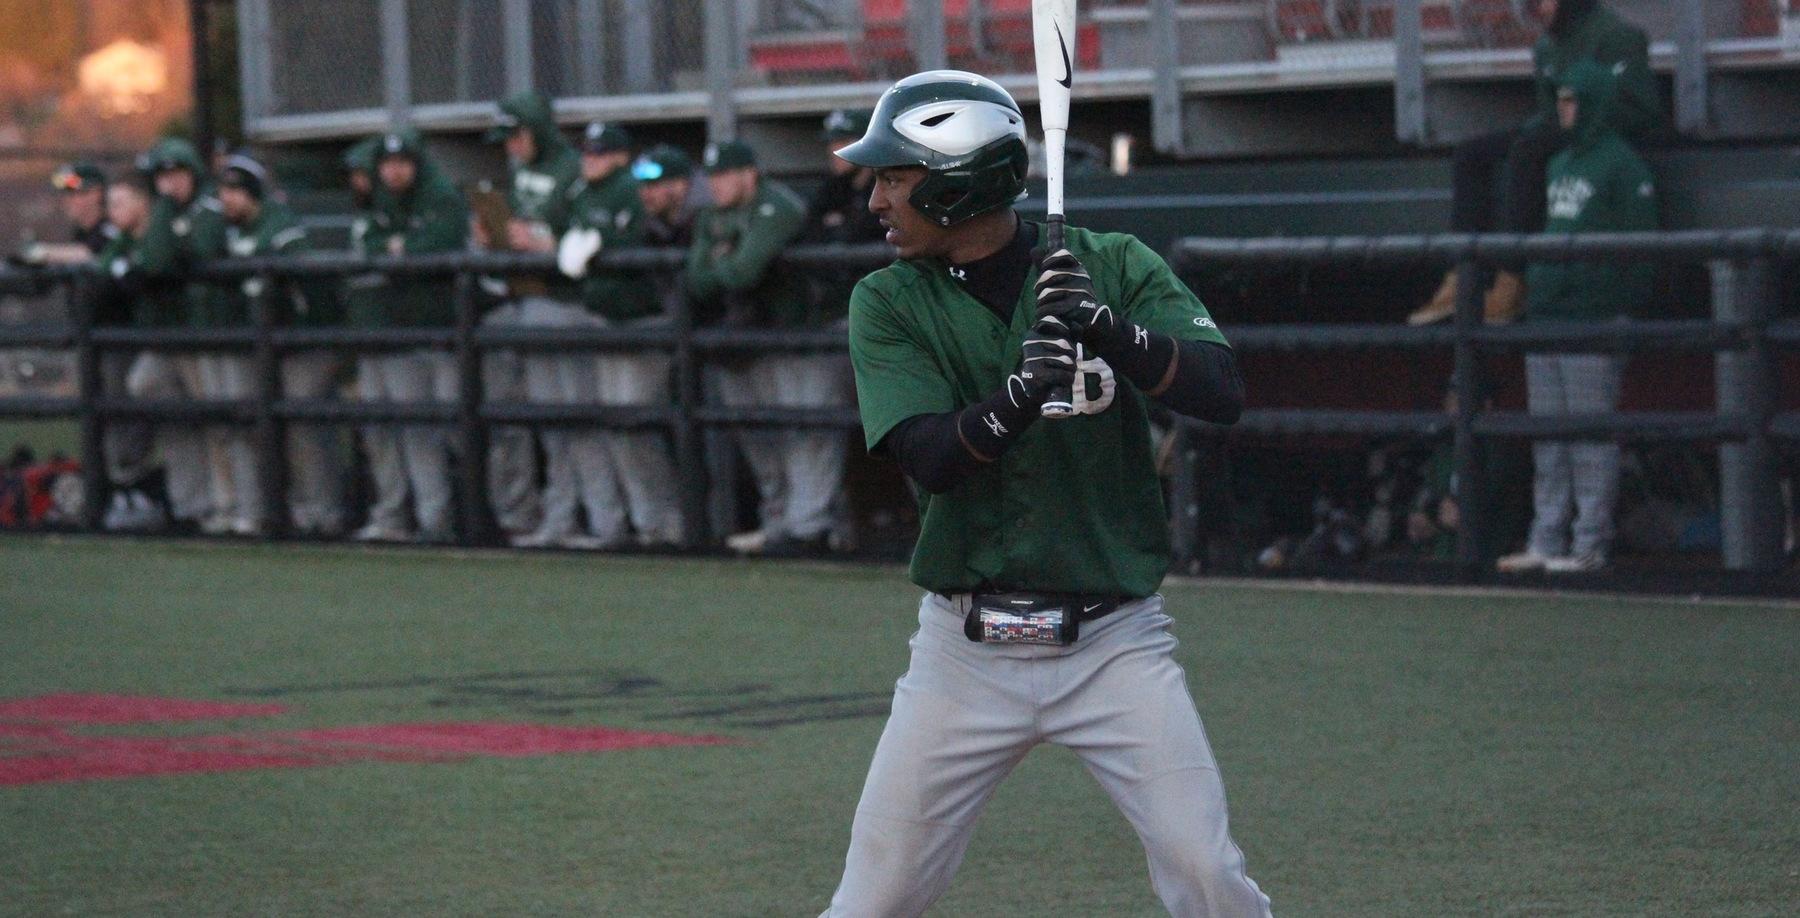 Bison score four in the ninth inning to knock off Westminster 7-5